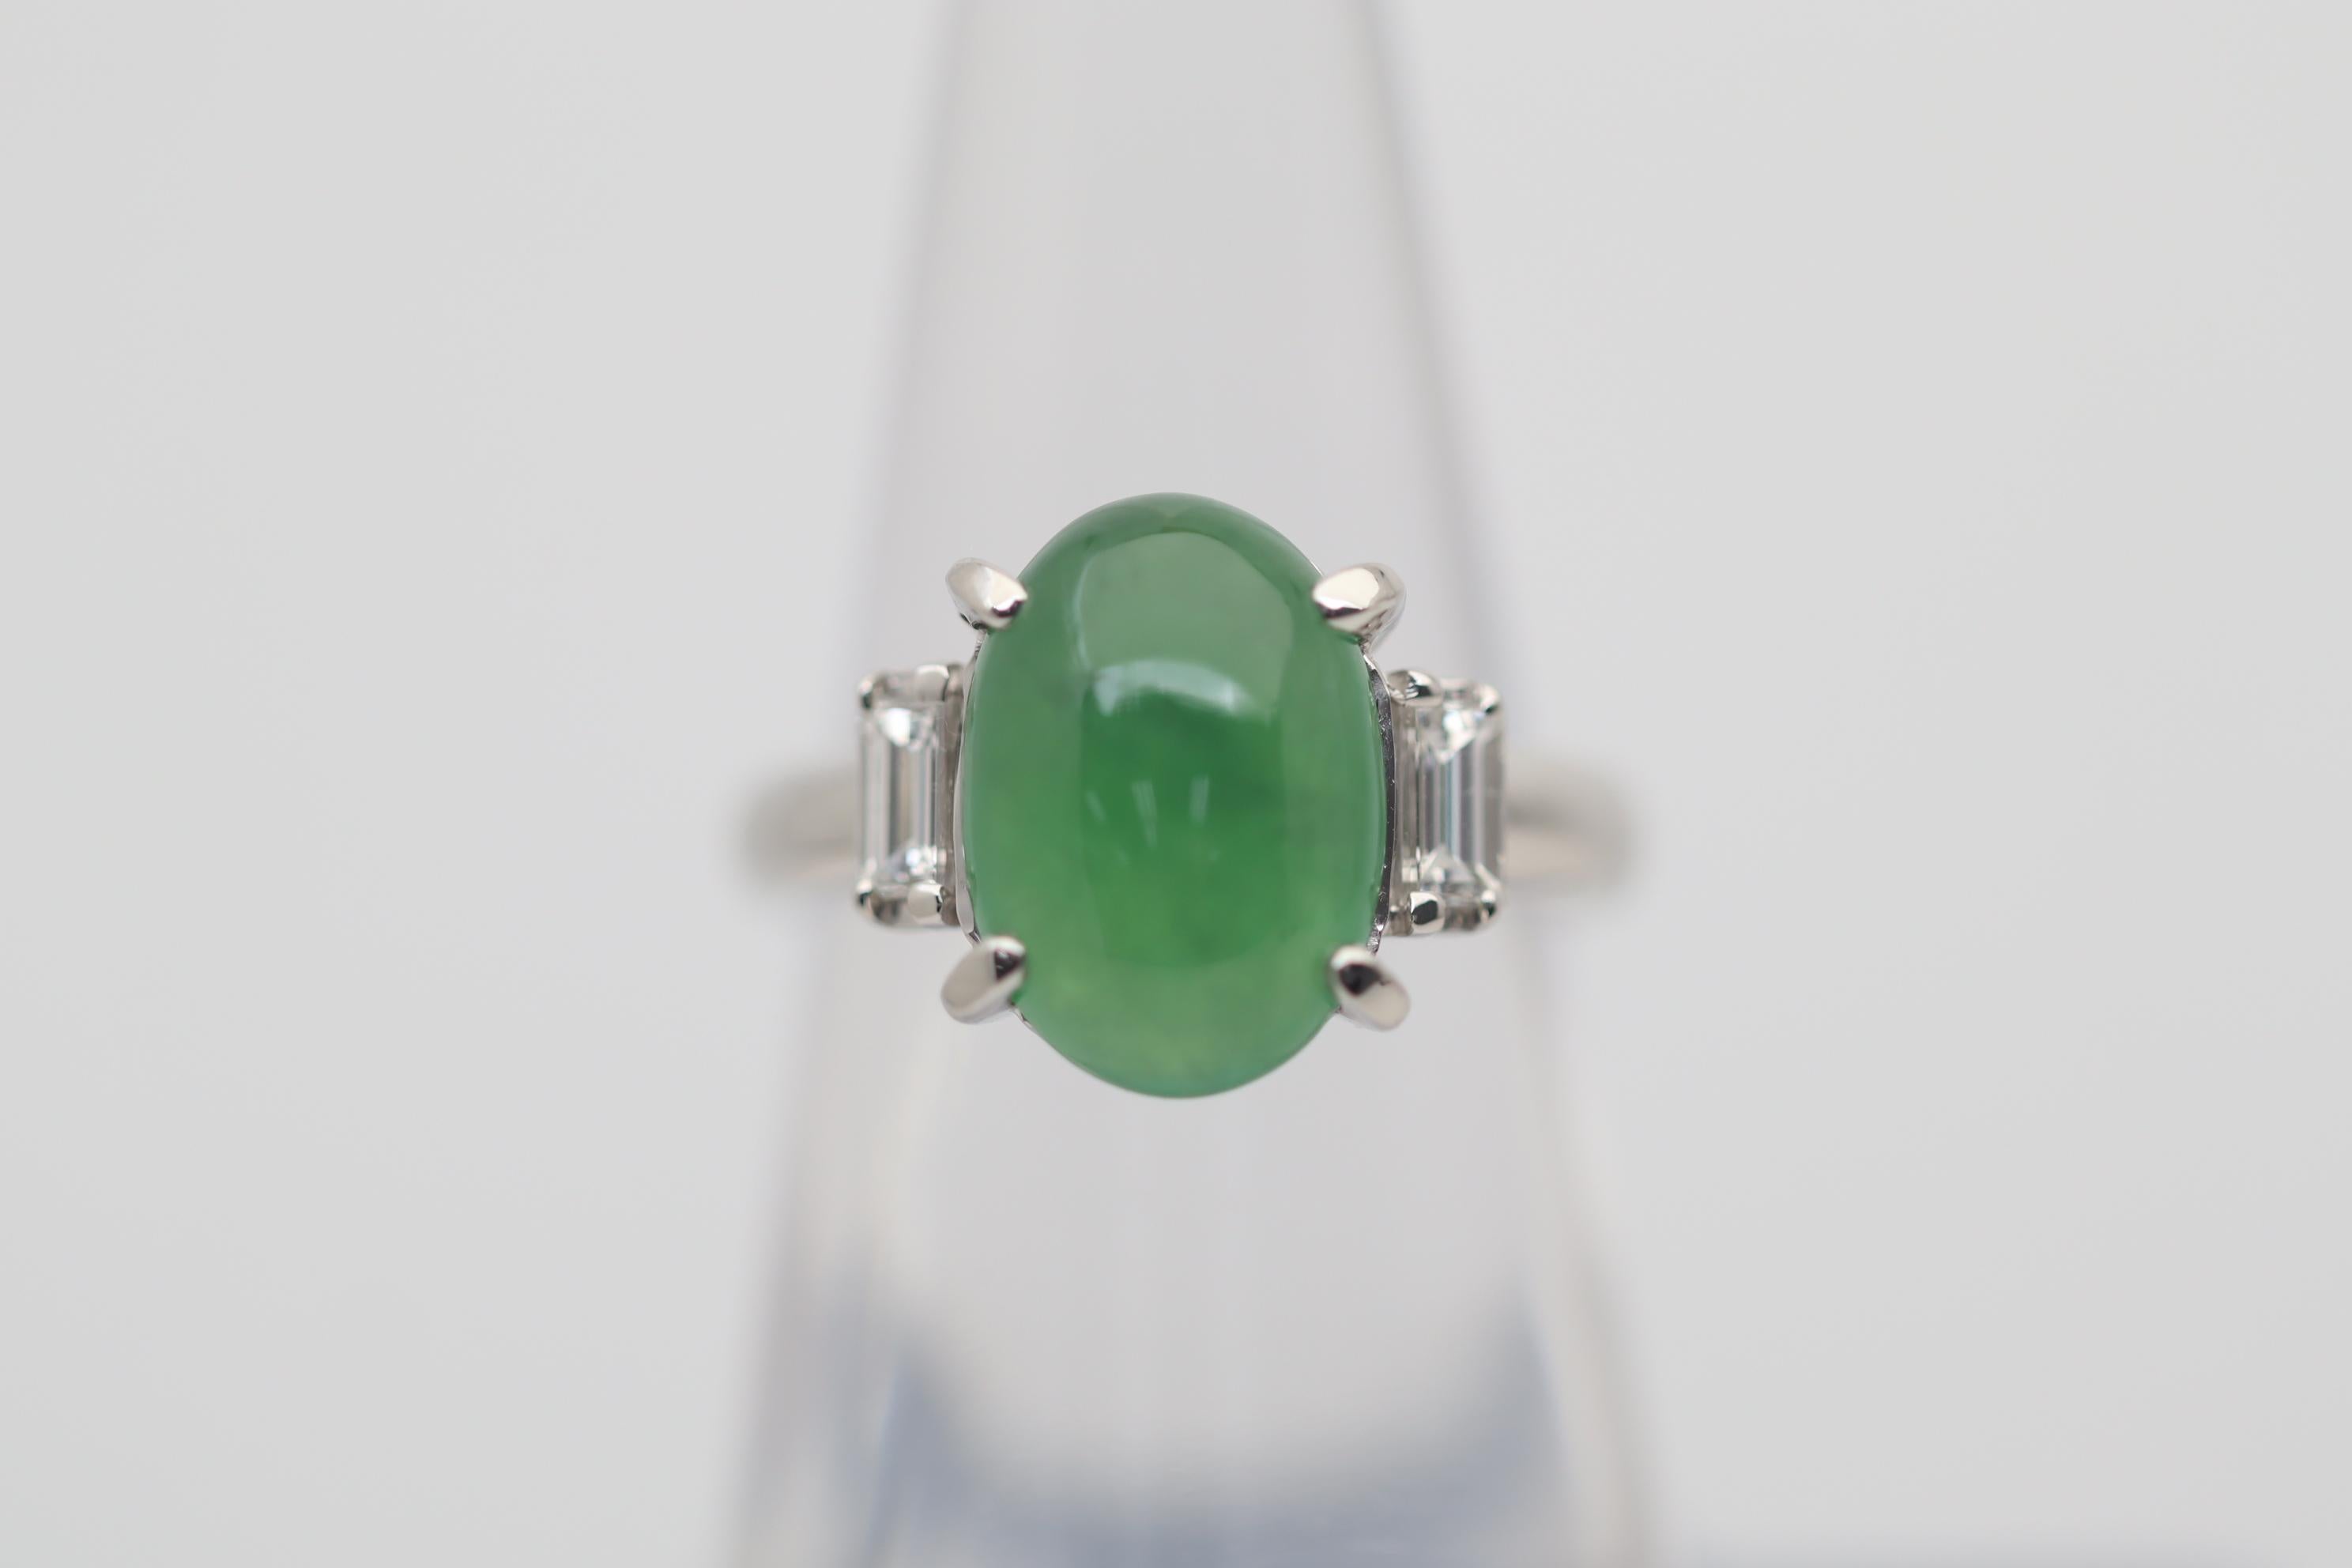 A classic 3 stone ring featuring a fine piece of natural jadeite jade. It weighs 4.71 carats and has a rich green color along with great translucency making the stone glow in the light. It is complemented by 2 baguette diamonds set on its sides and